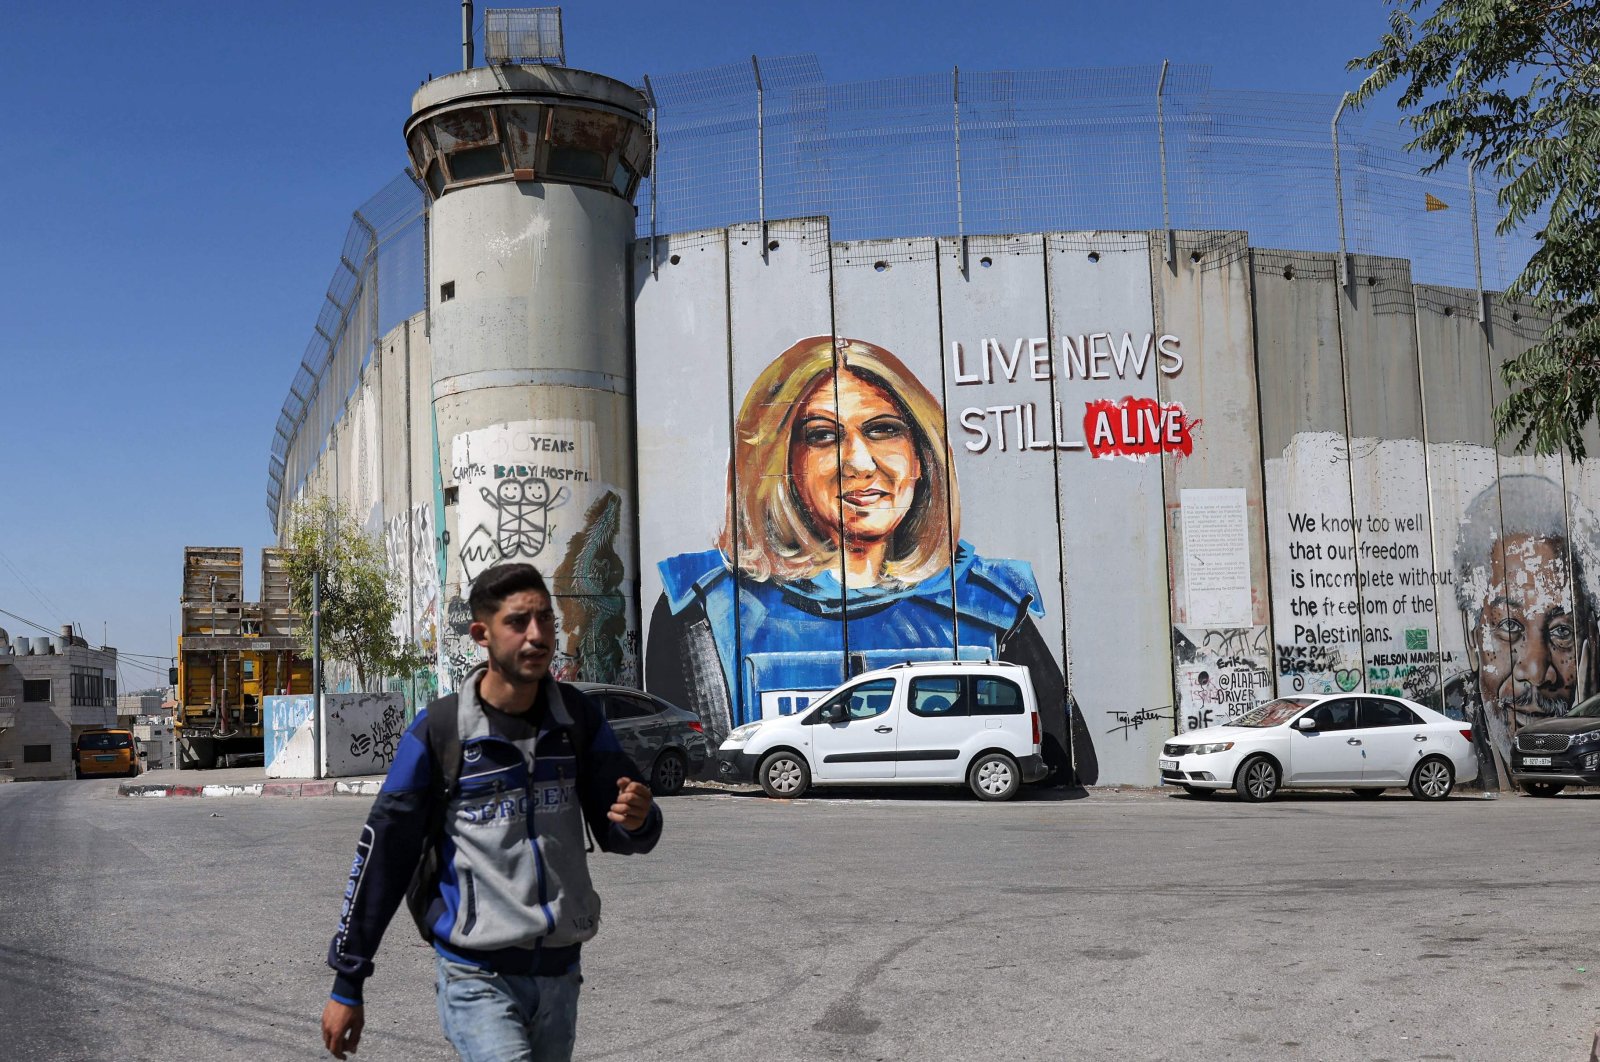 A youth walks past a mural depicting slain Al-Jazeera journalist Shireen Abu Akleh, who was killed while covering an Israeli army raid in Jenin, drawn along Israel&#039;s controversial separation barrier in Bethlehem, West Bank, occupied Palestine, July 6, 2022. (AFP Photo)